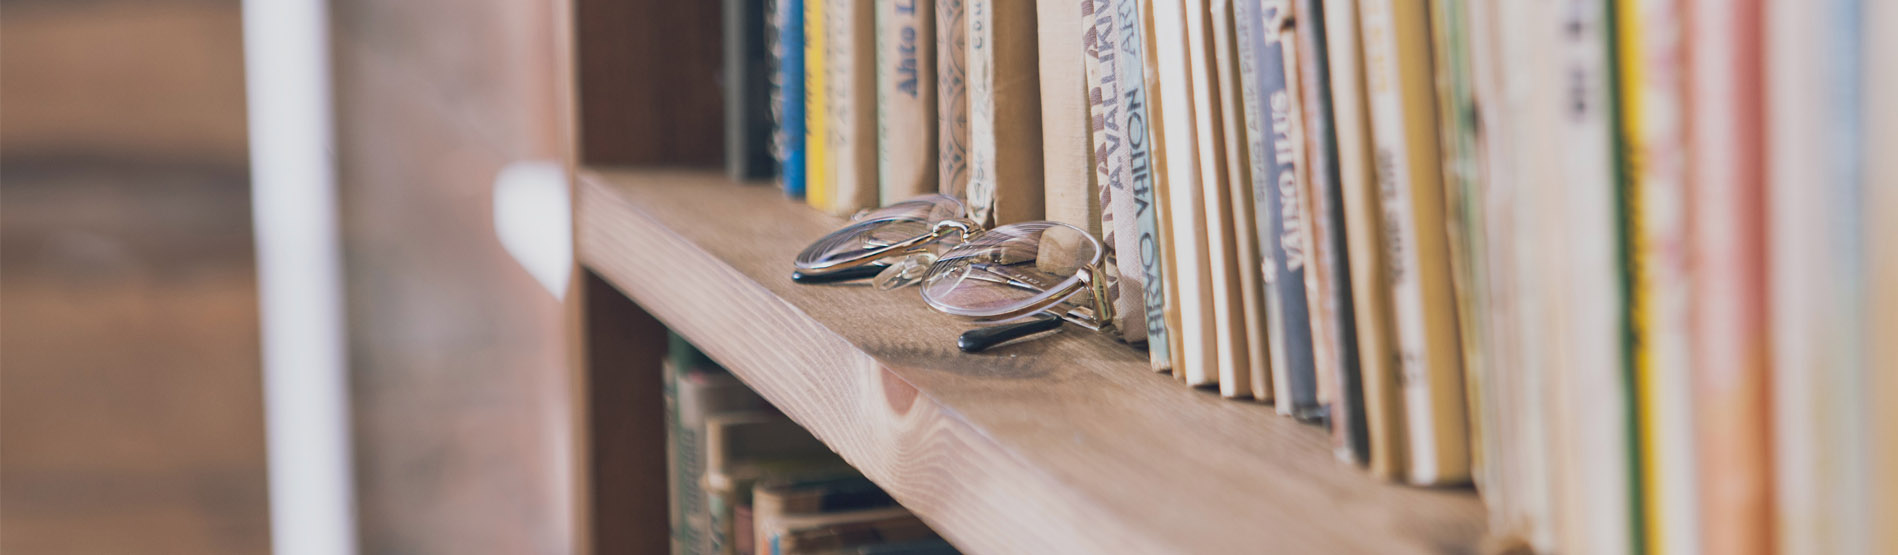 Image of book shelf with books and glasses 